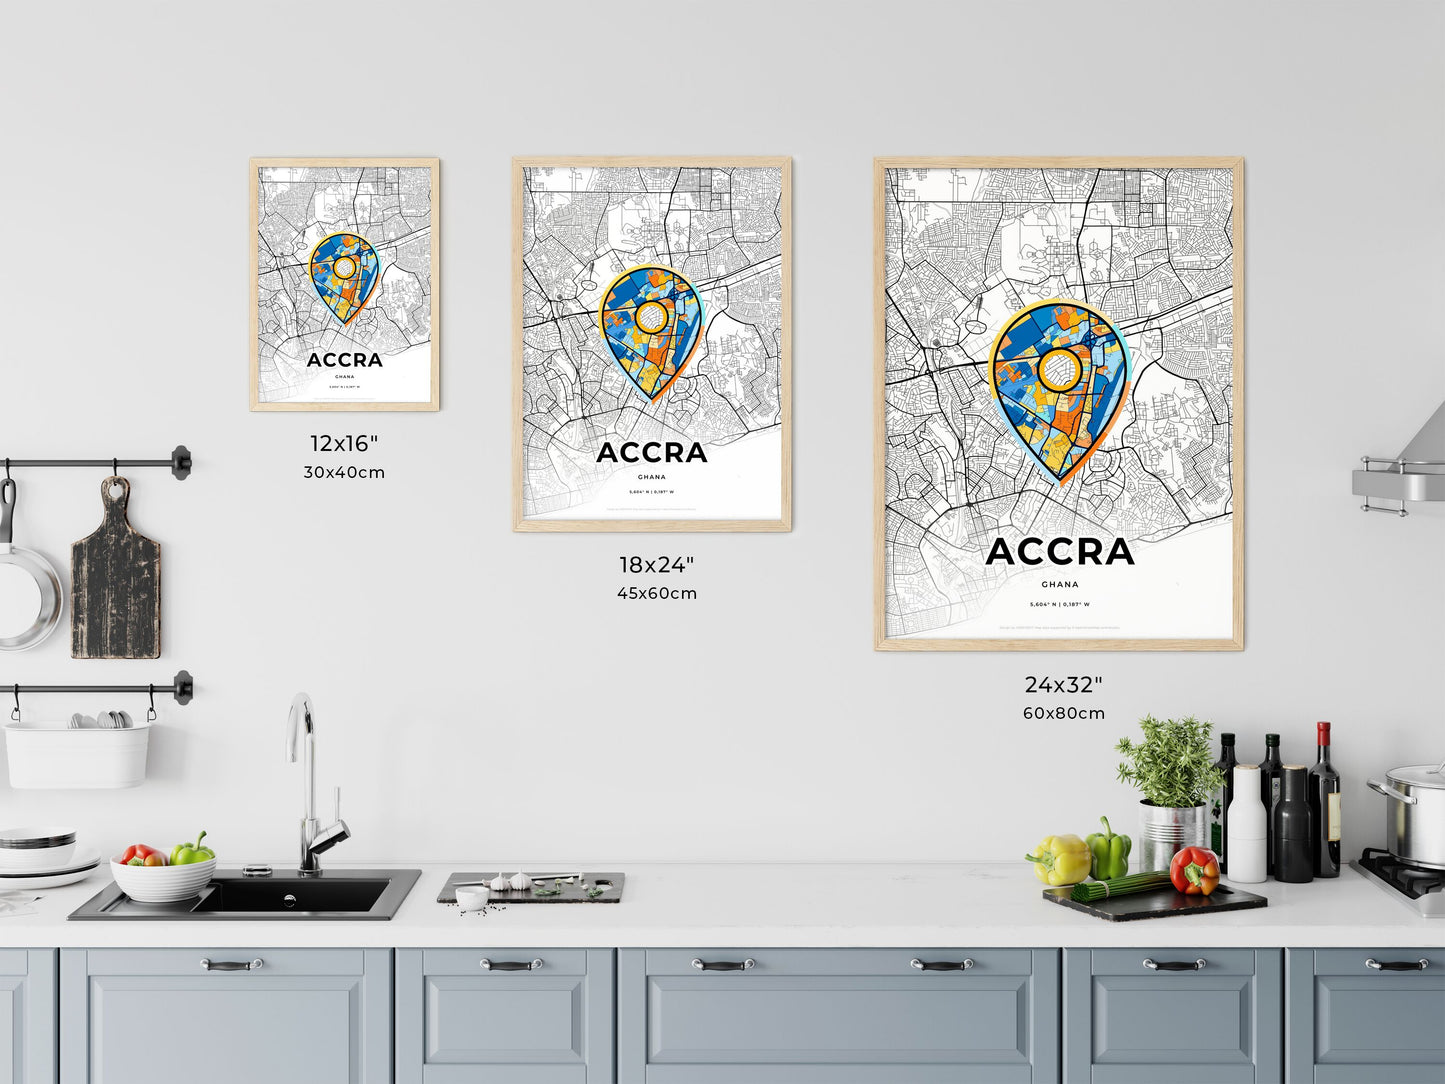 ACCRA GHANA minimal art map with a colorful icon. Where it all began, Couple map gift.